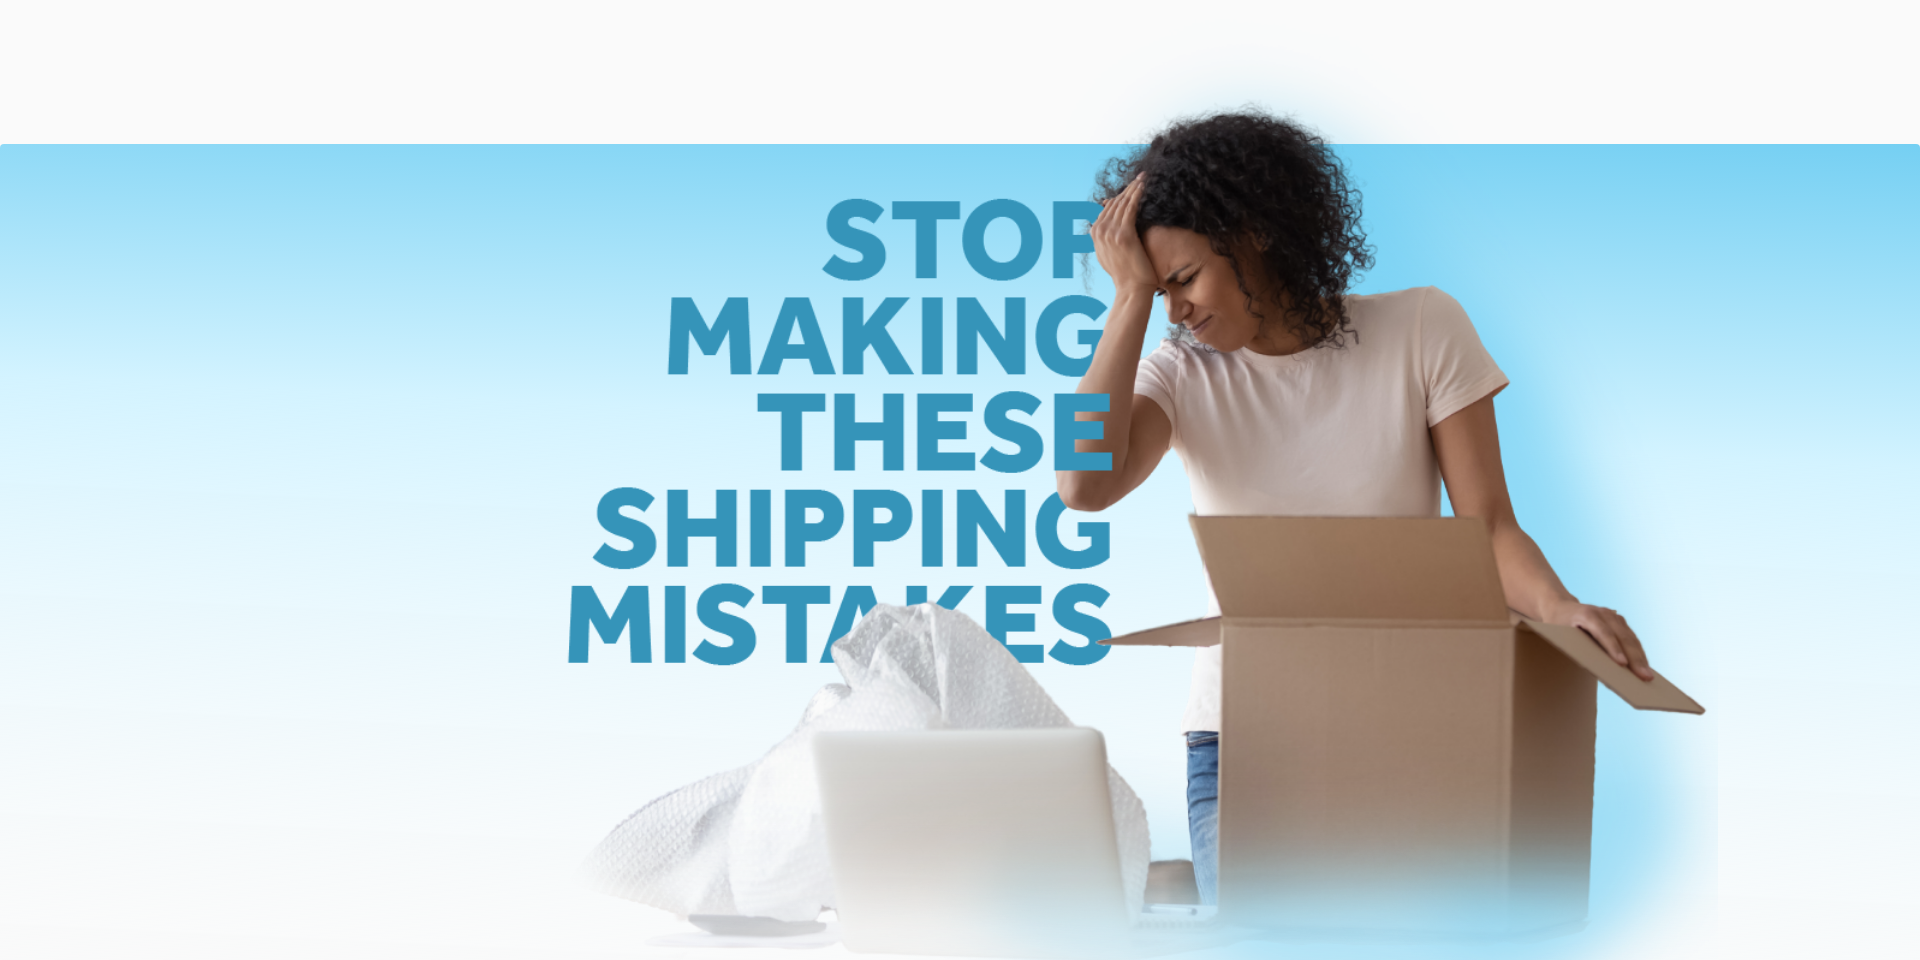 CS - Stop Making These Shipping Mistakes